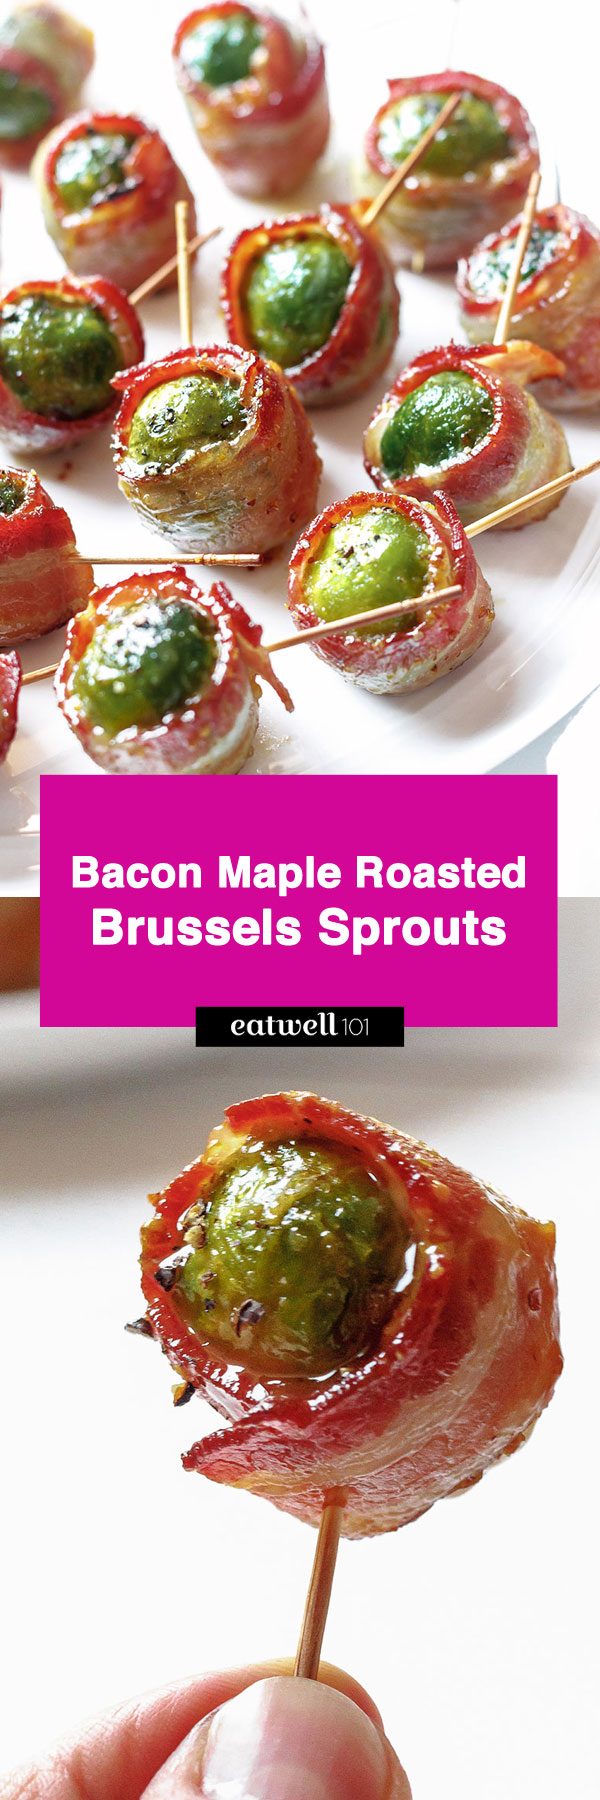 Bacon Maple Roasted Brussels Sprouts - #brussels-sprouts #recipe #eatwell101 - Tender goodness of Brussels sprouts and extra-crispy bacon are a perfect addition to your snack table!